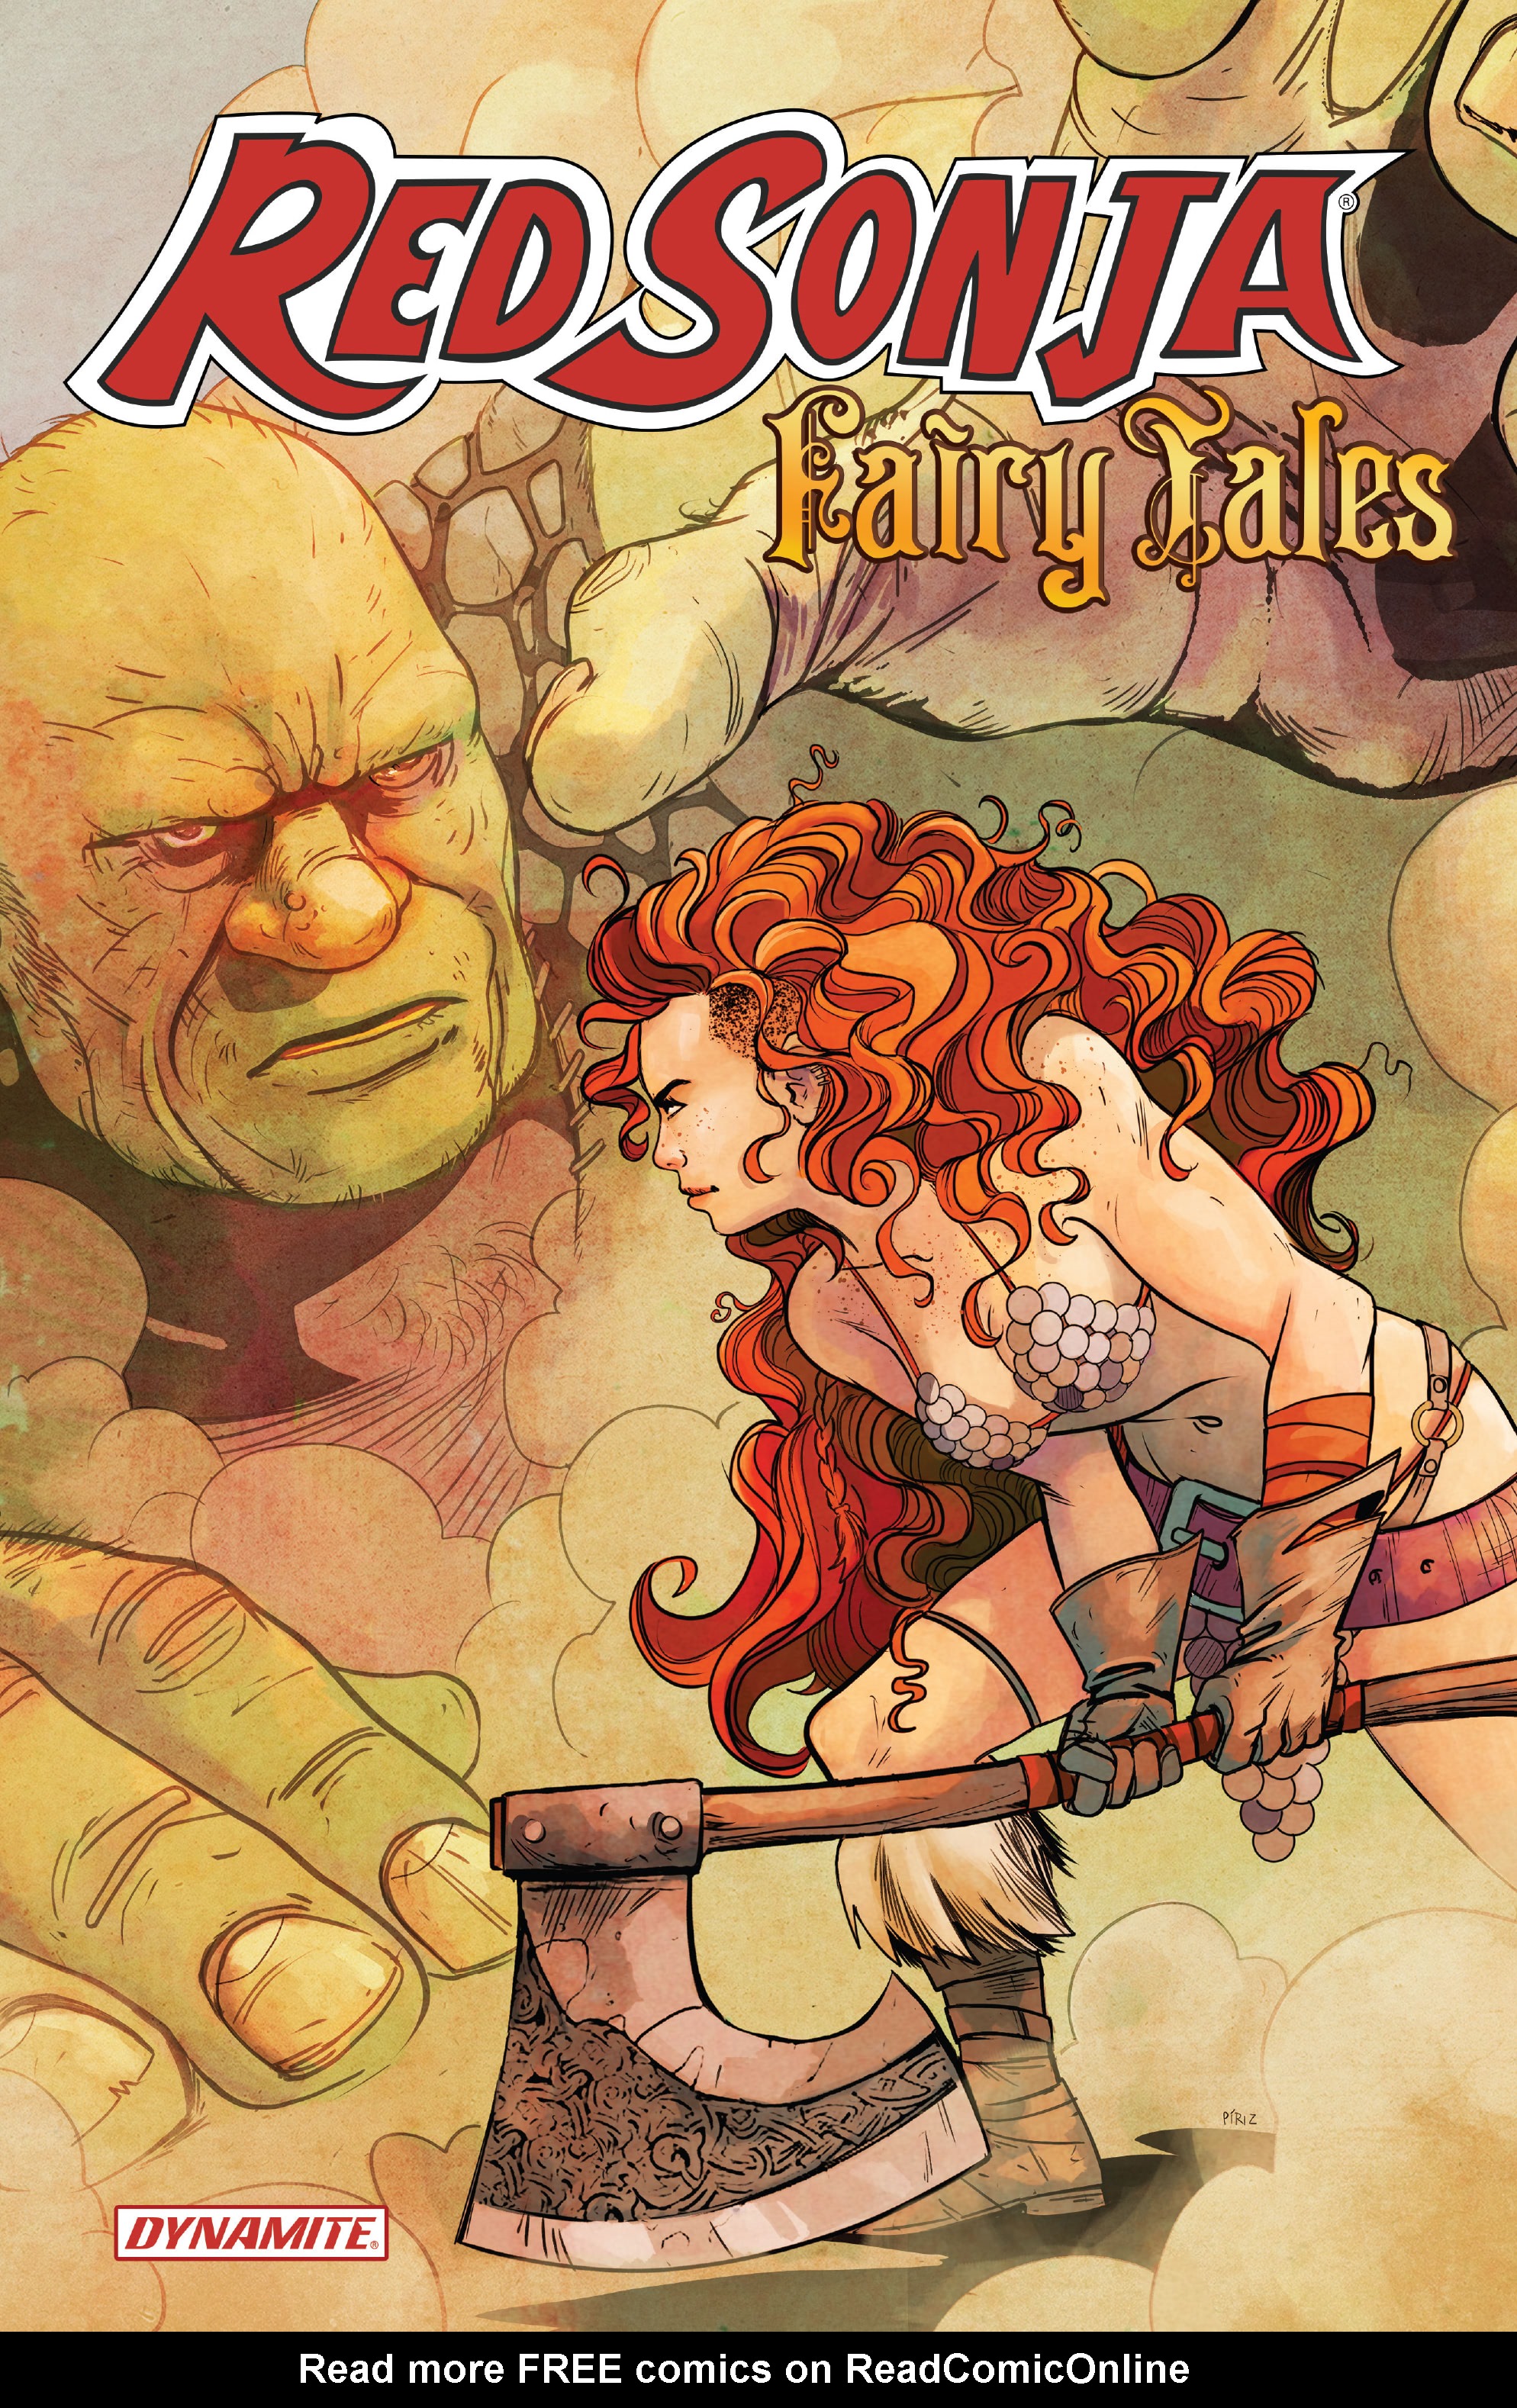 Read online Red Sonja Fairy Tales comic -  Issue # Full - 3